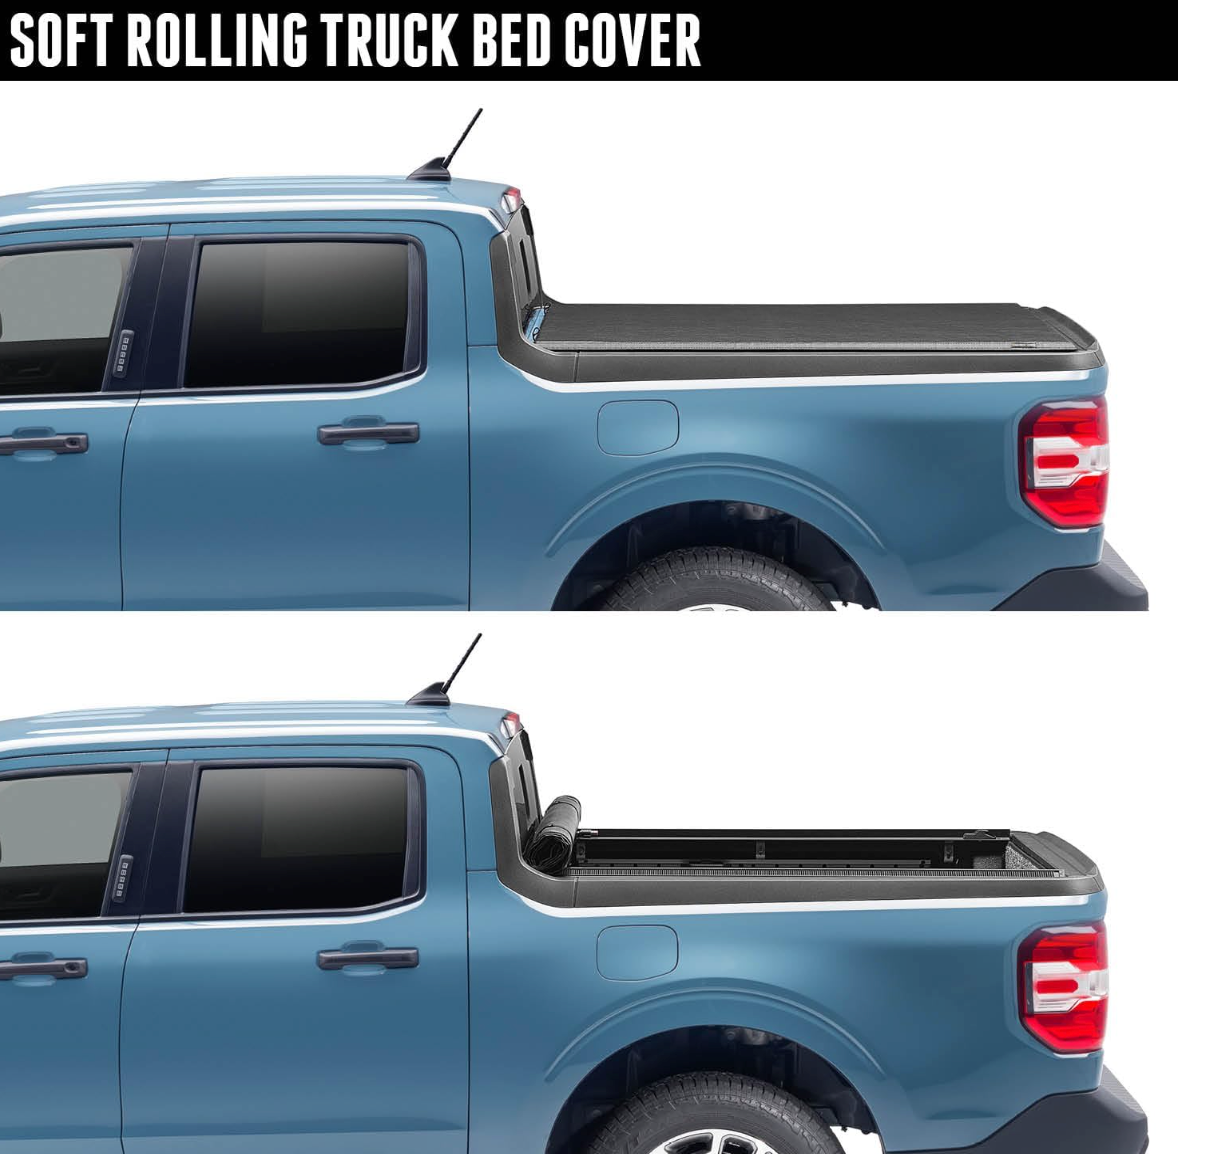 RealTruck TruXedo Lo Pro Soft Roll Up Truck Bed Tonneau Cove